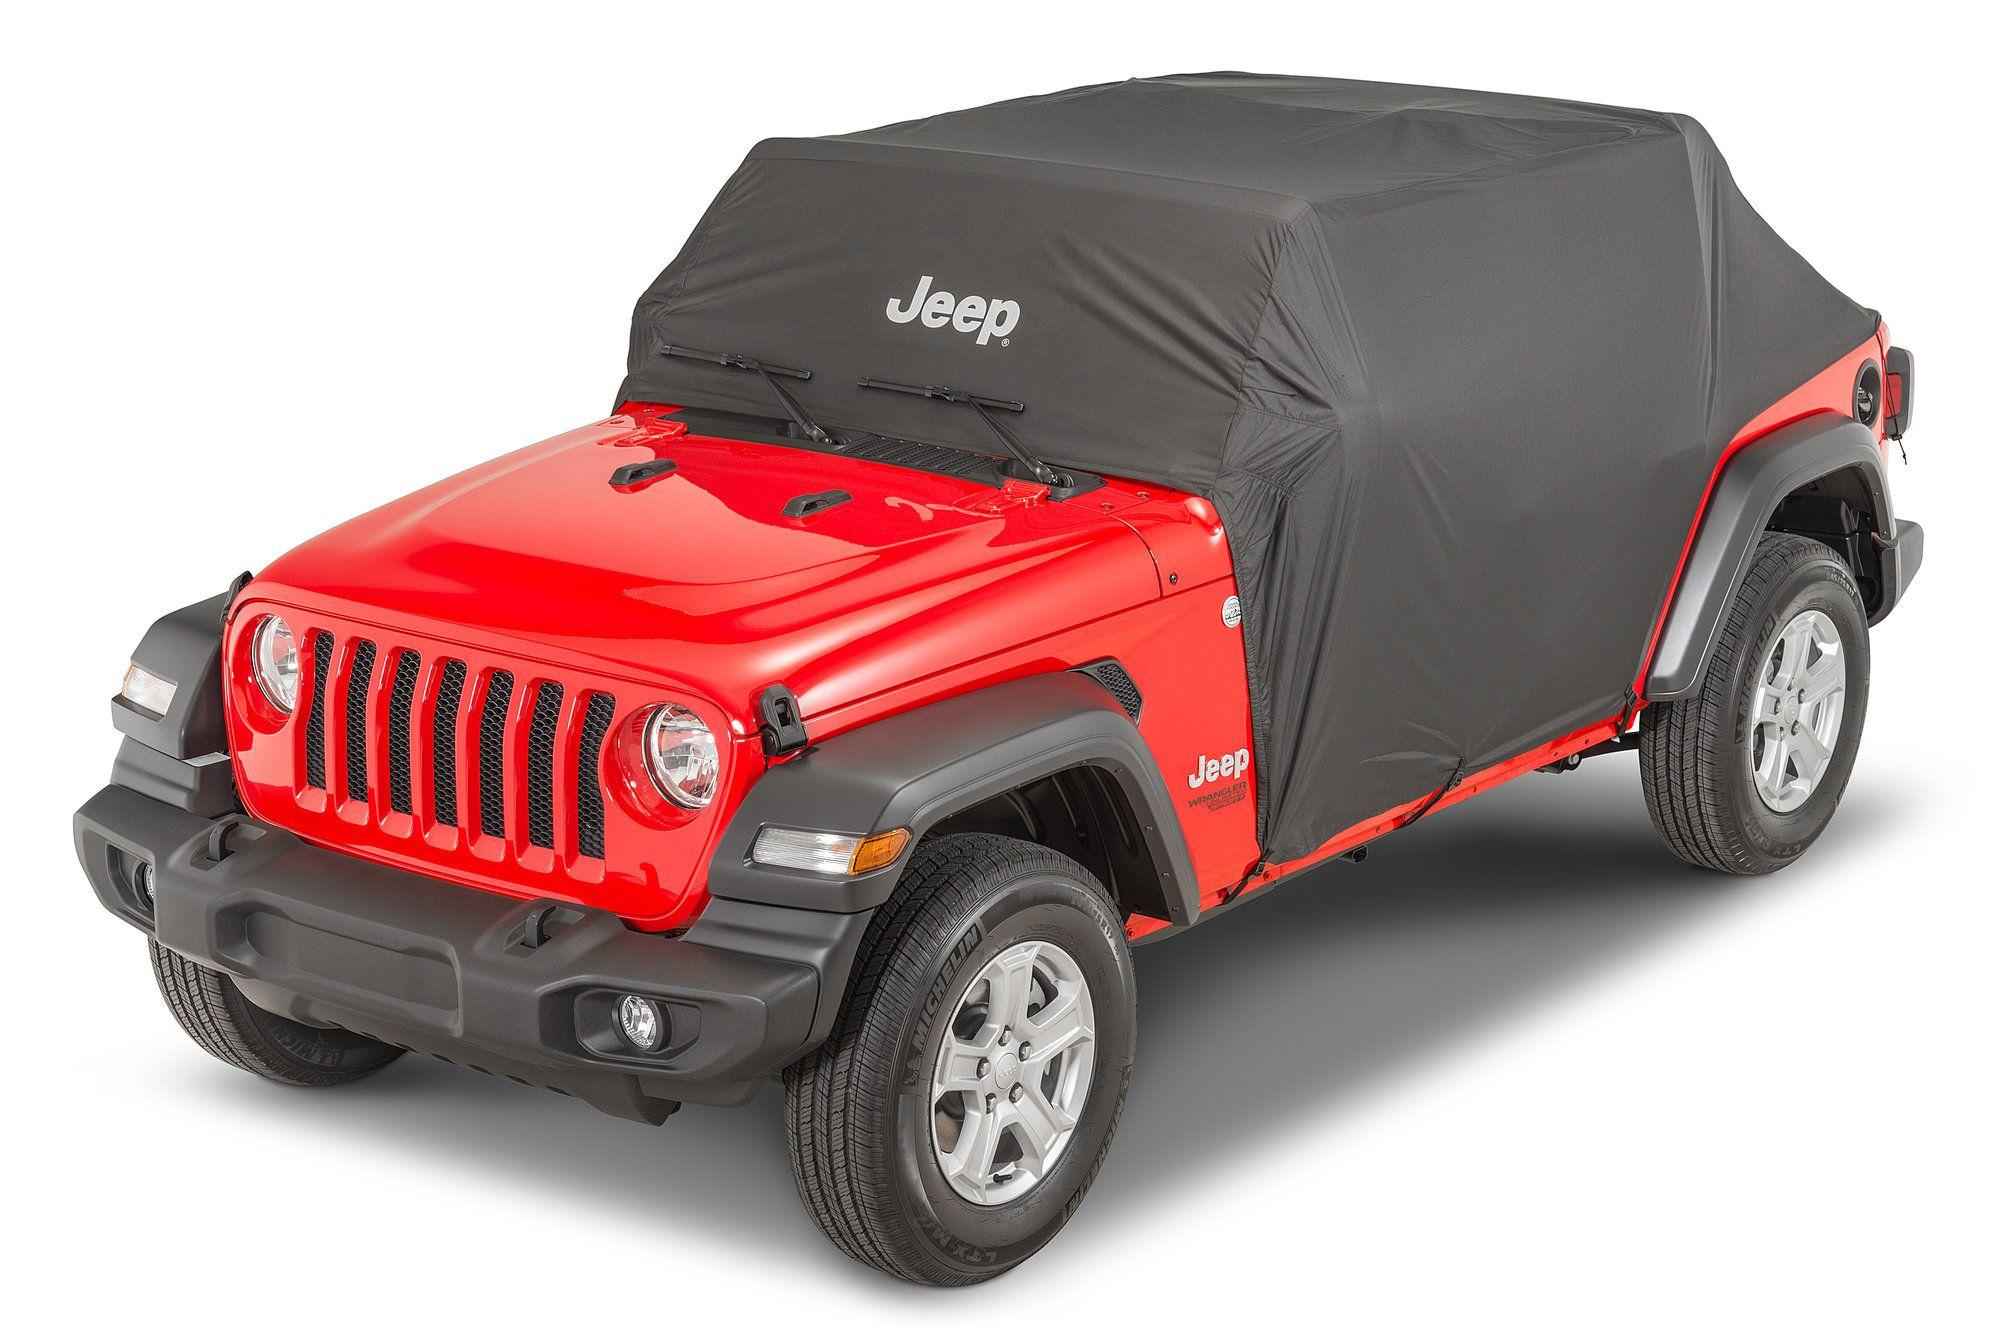 Jeep Unlimited Logo - Mopar 82215370 Jeep Logo Cab Cover for 18-19 Jeep Wrangler Unlimited ...